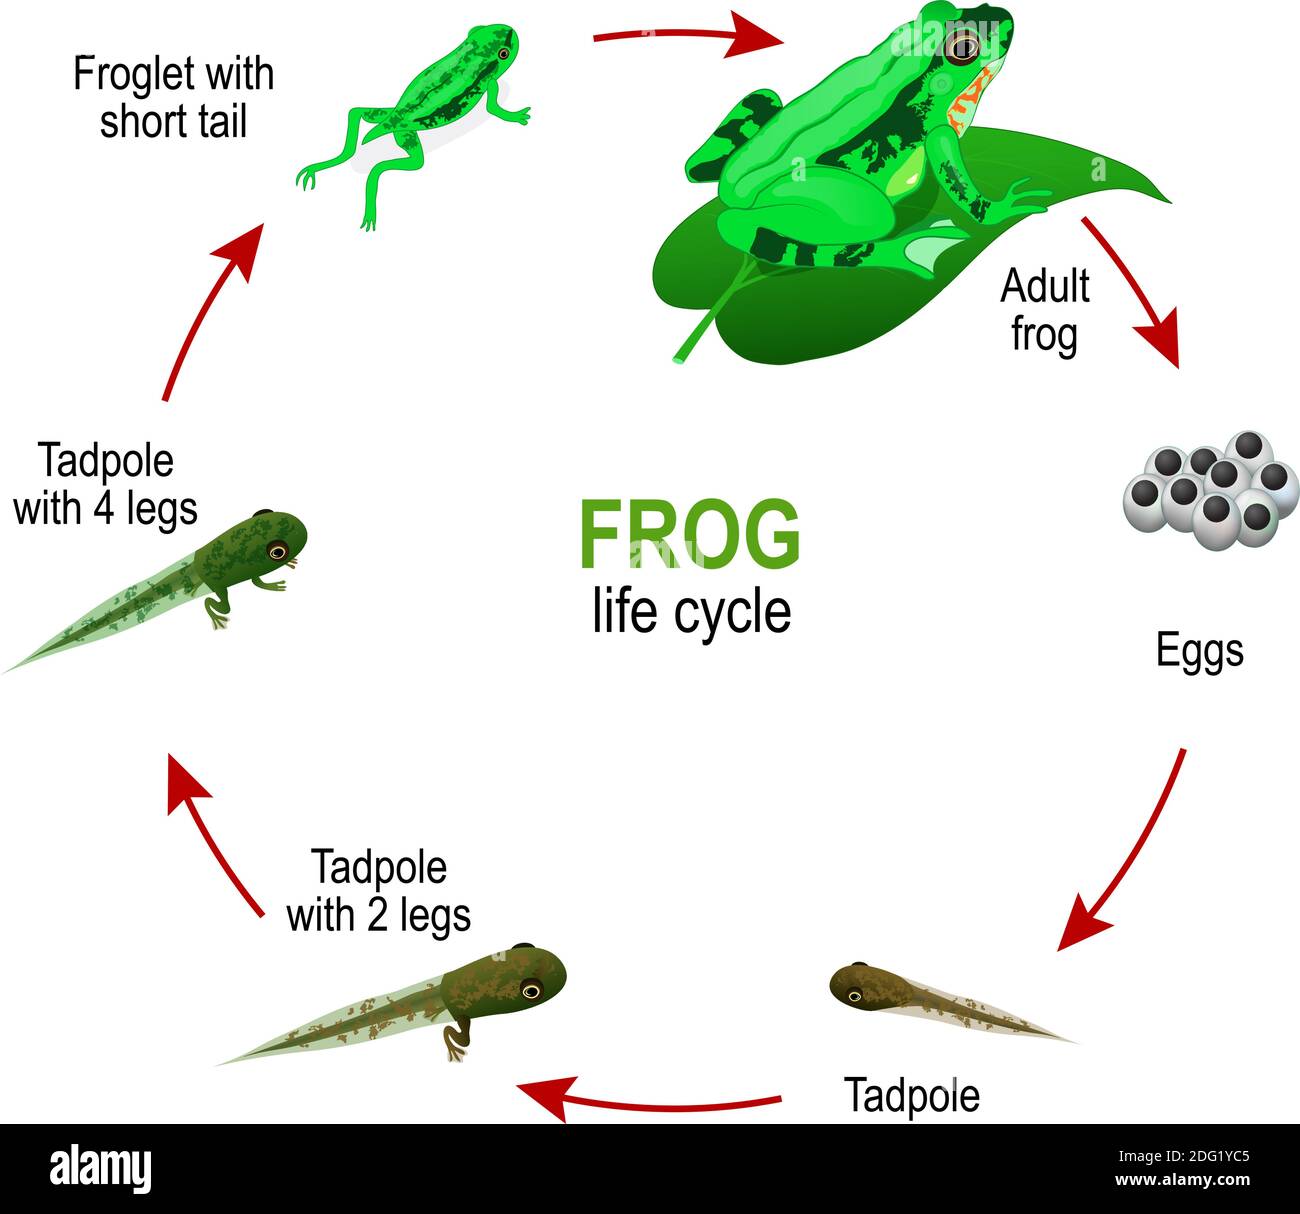 frog life cycle from eggs and Tadpoles to Froglet with short tail and adult Amphibia. Vector diagram for educational, science, and biological use Stock Vector